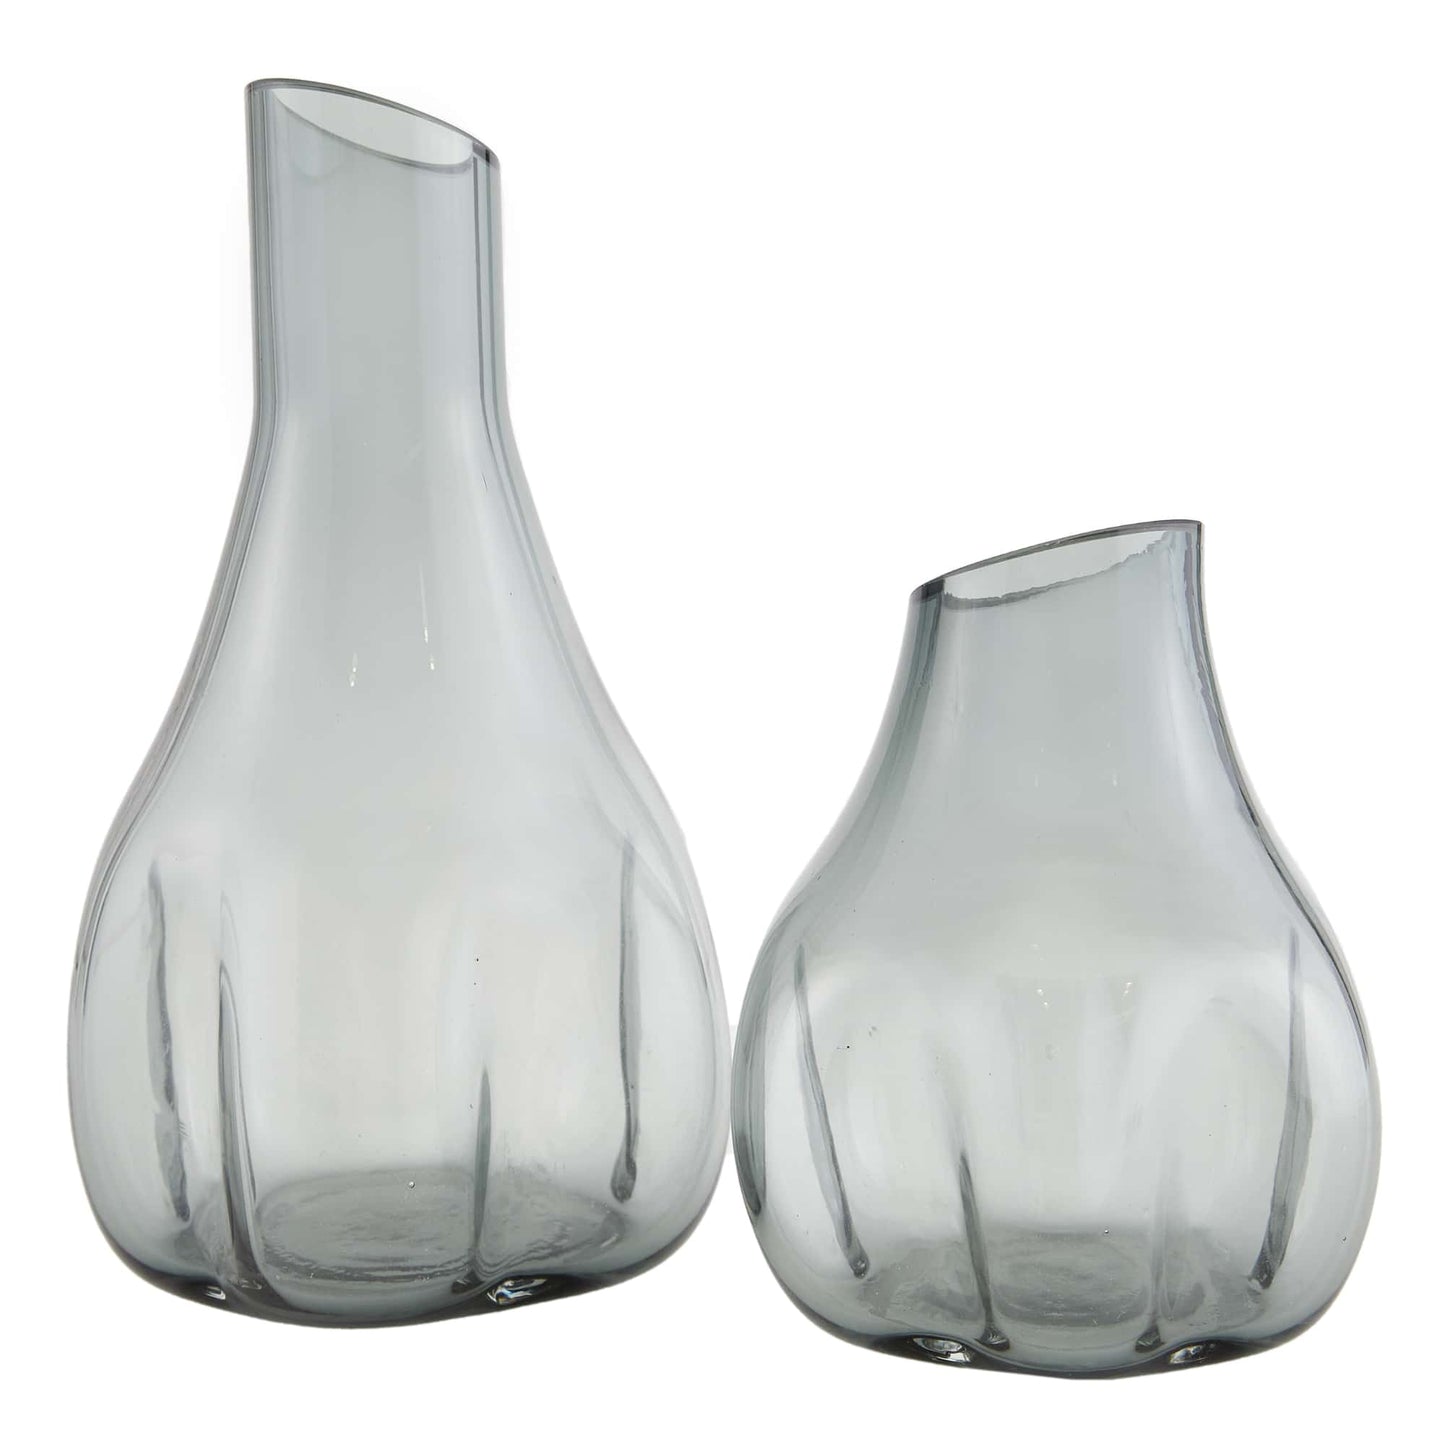 Rampart Vases - Set of 2 Blue Smoke Glass Vessels with Angled Openings